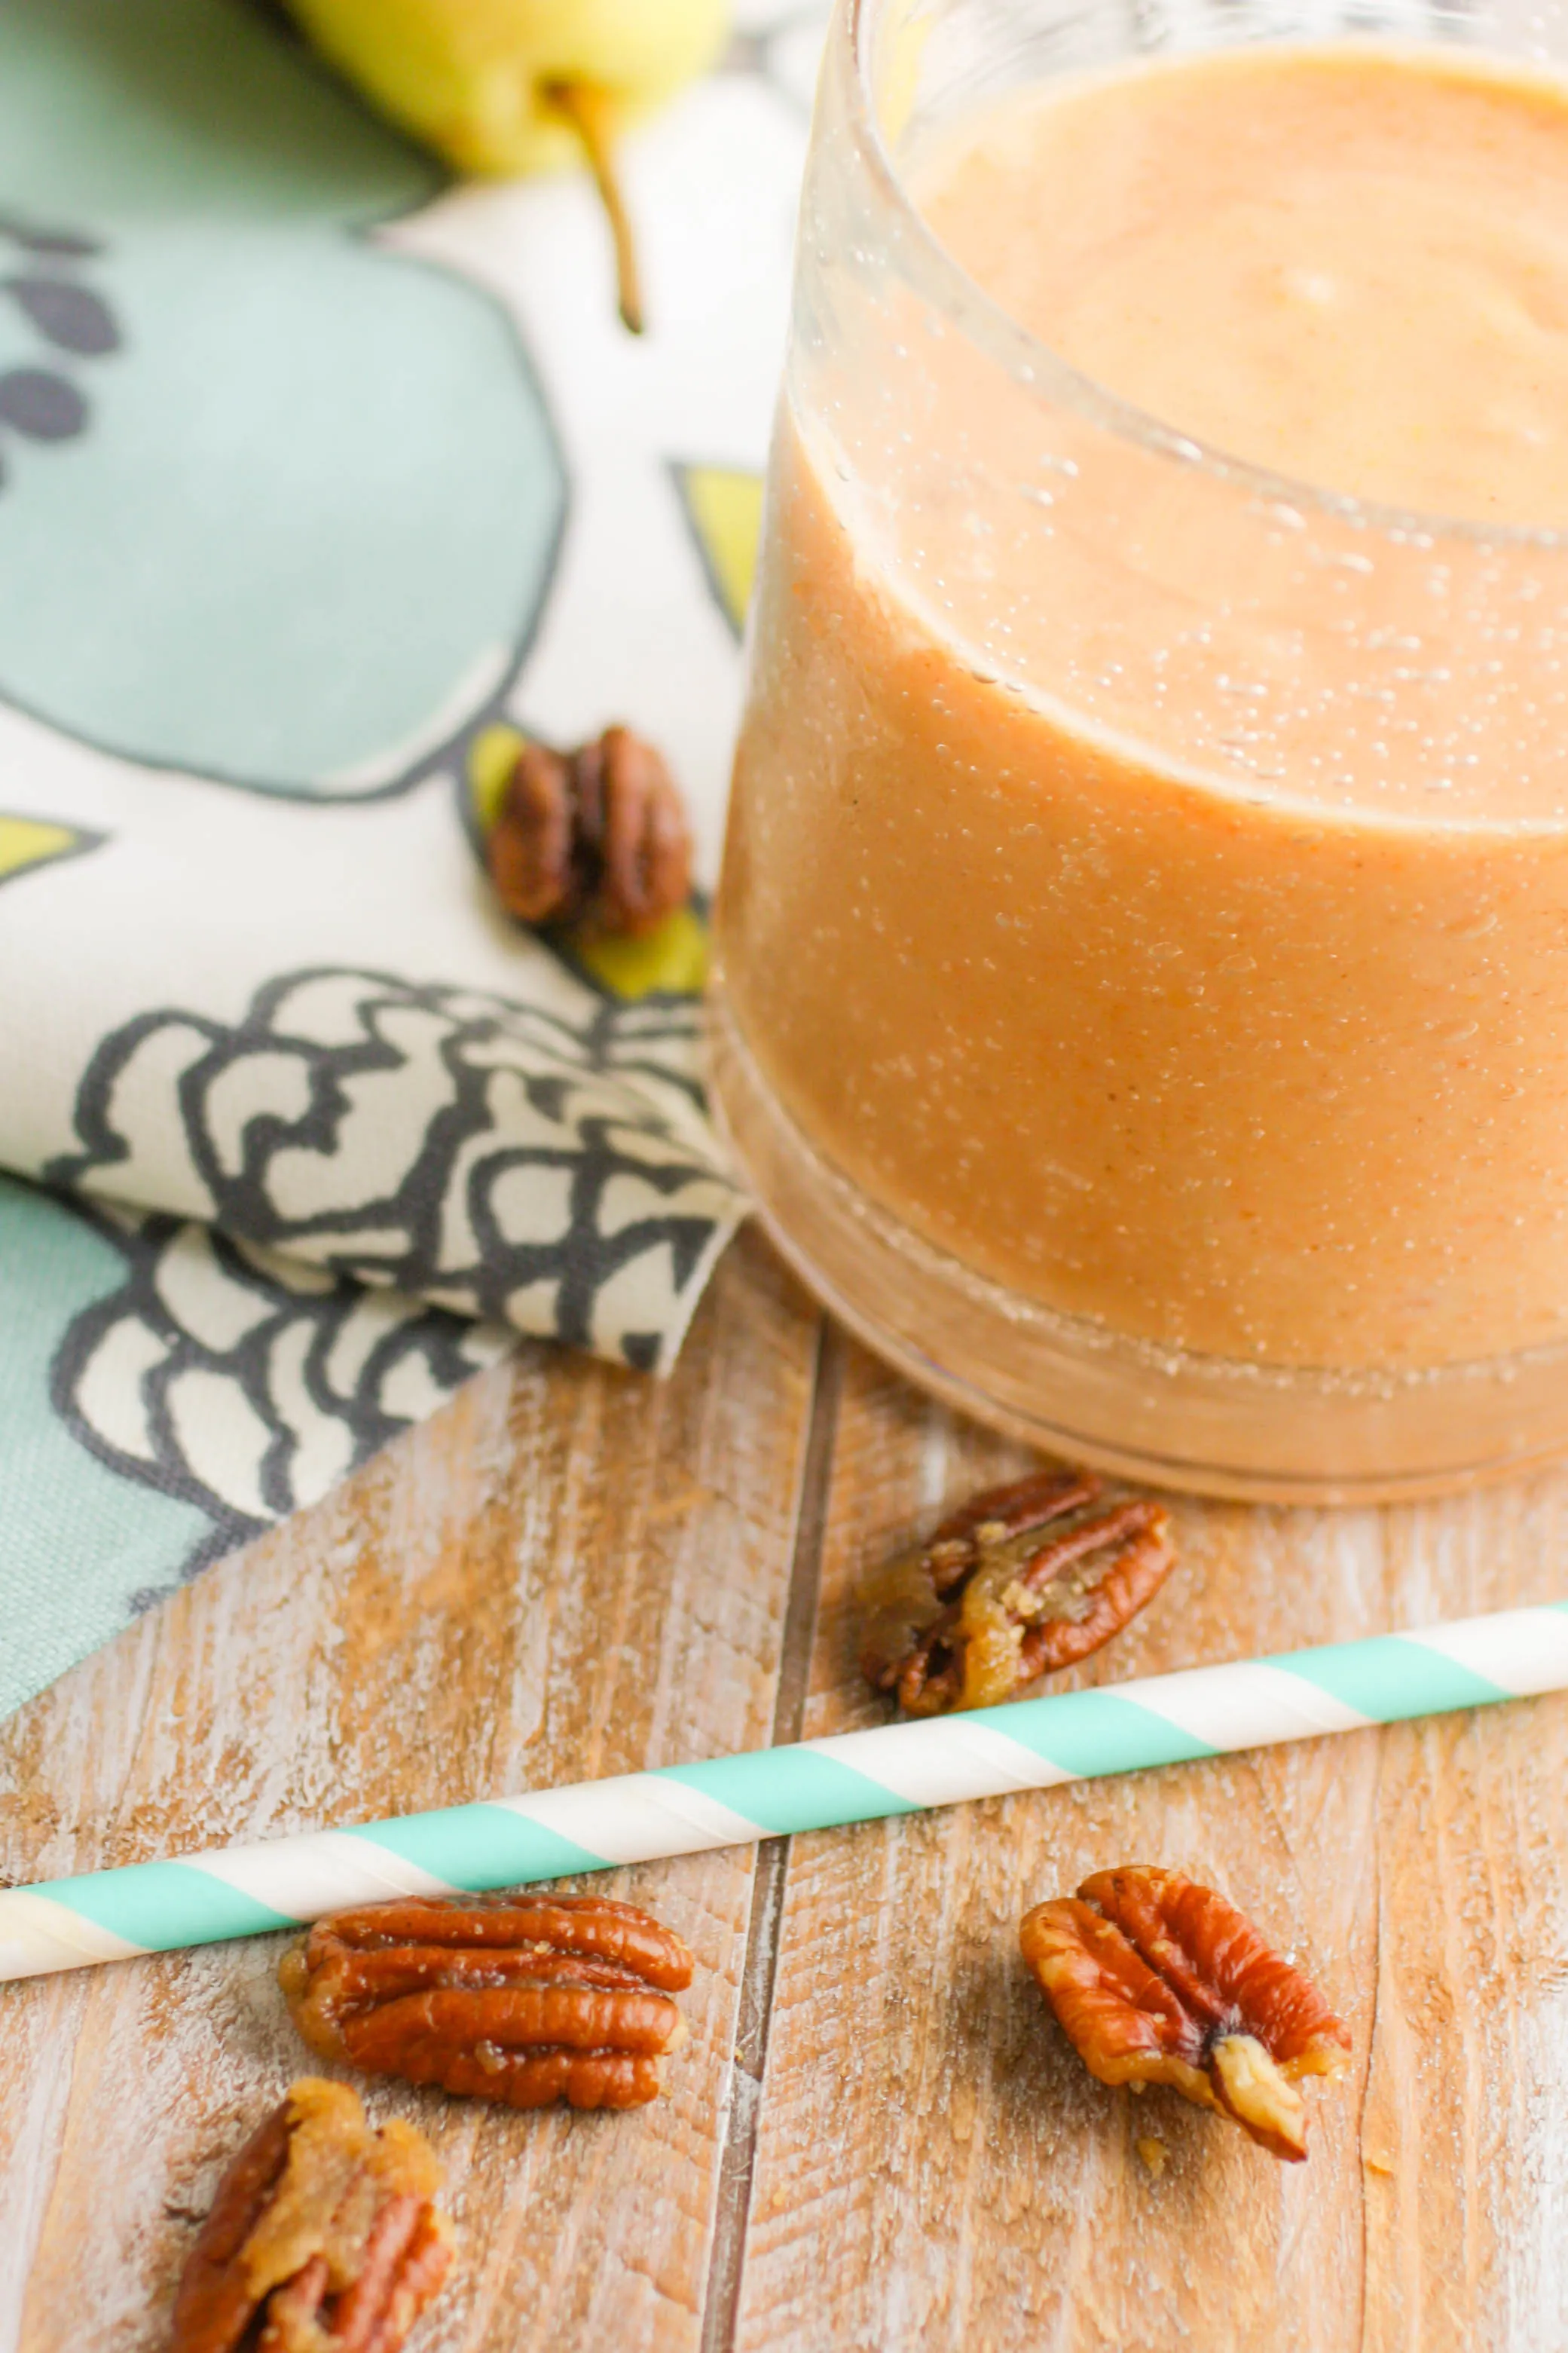 Sweet Potato-Pear Smoothies with Candied Pecans make a fabulous fall breakfast. You'll love the fall-inspired ingredients in these smoothies!